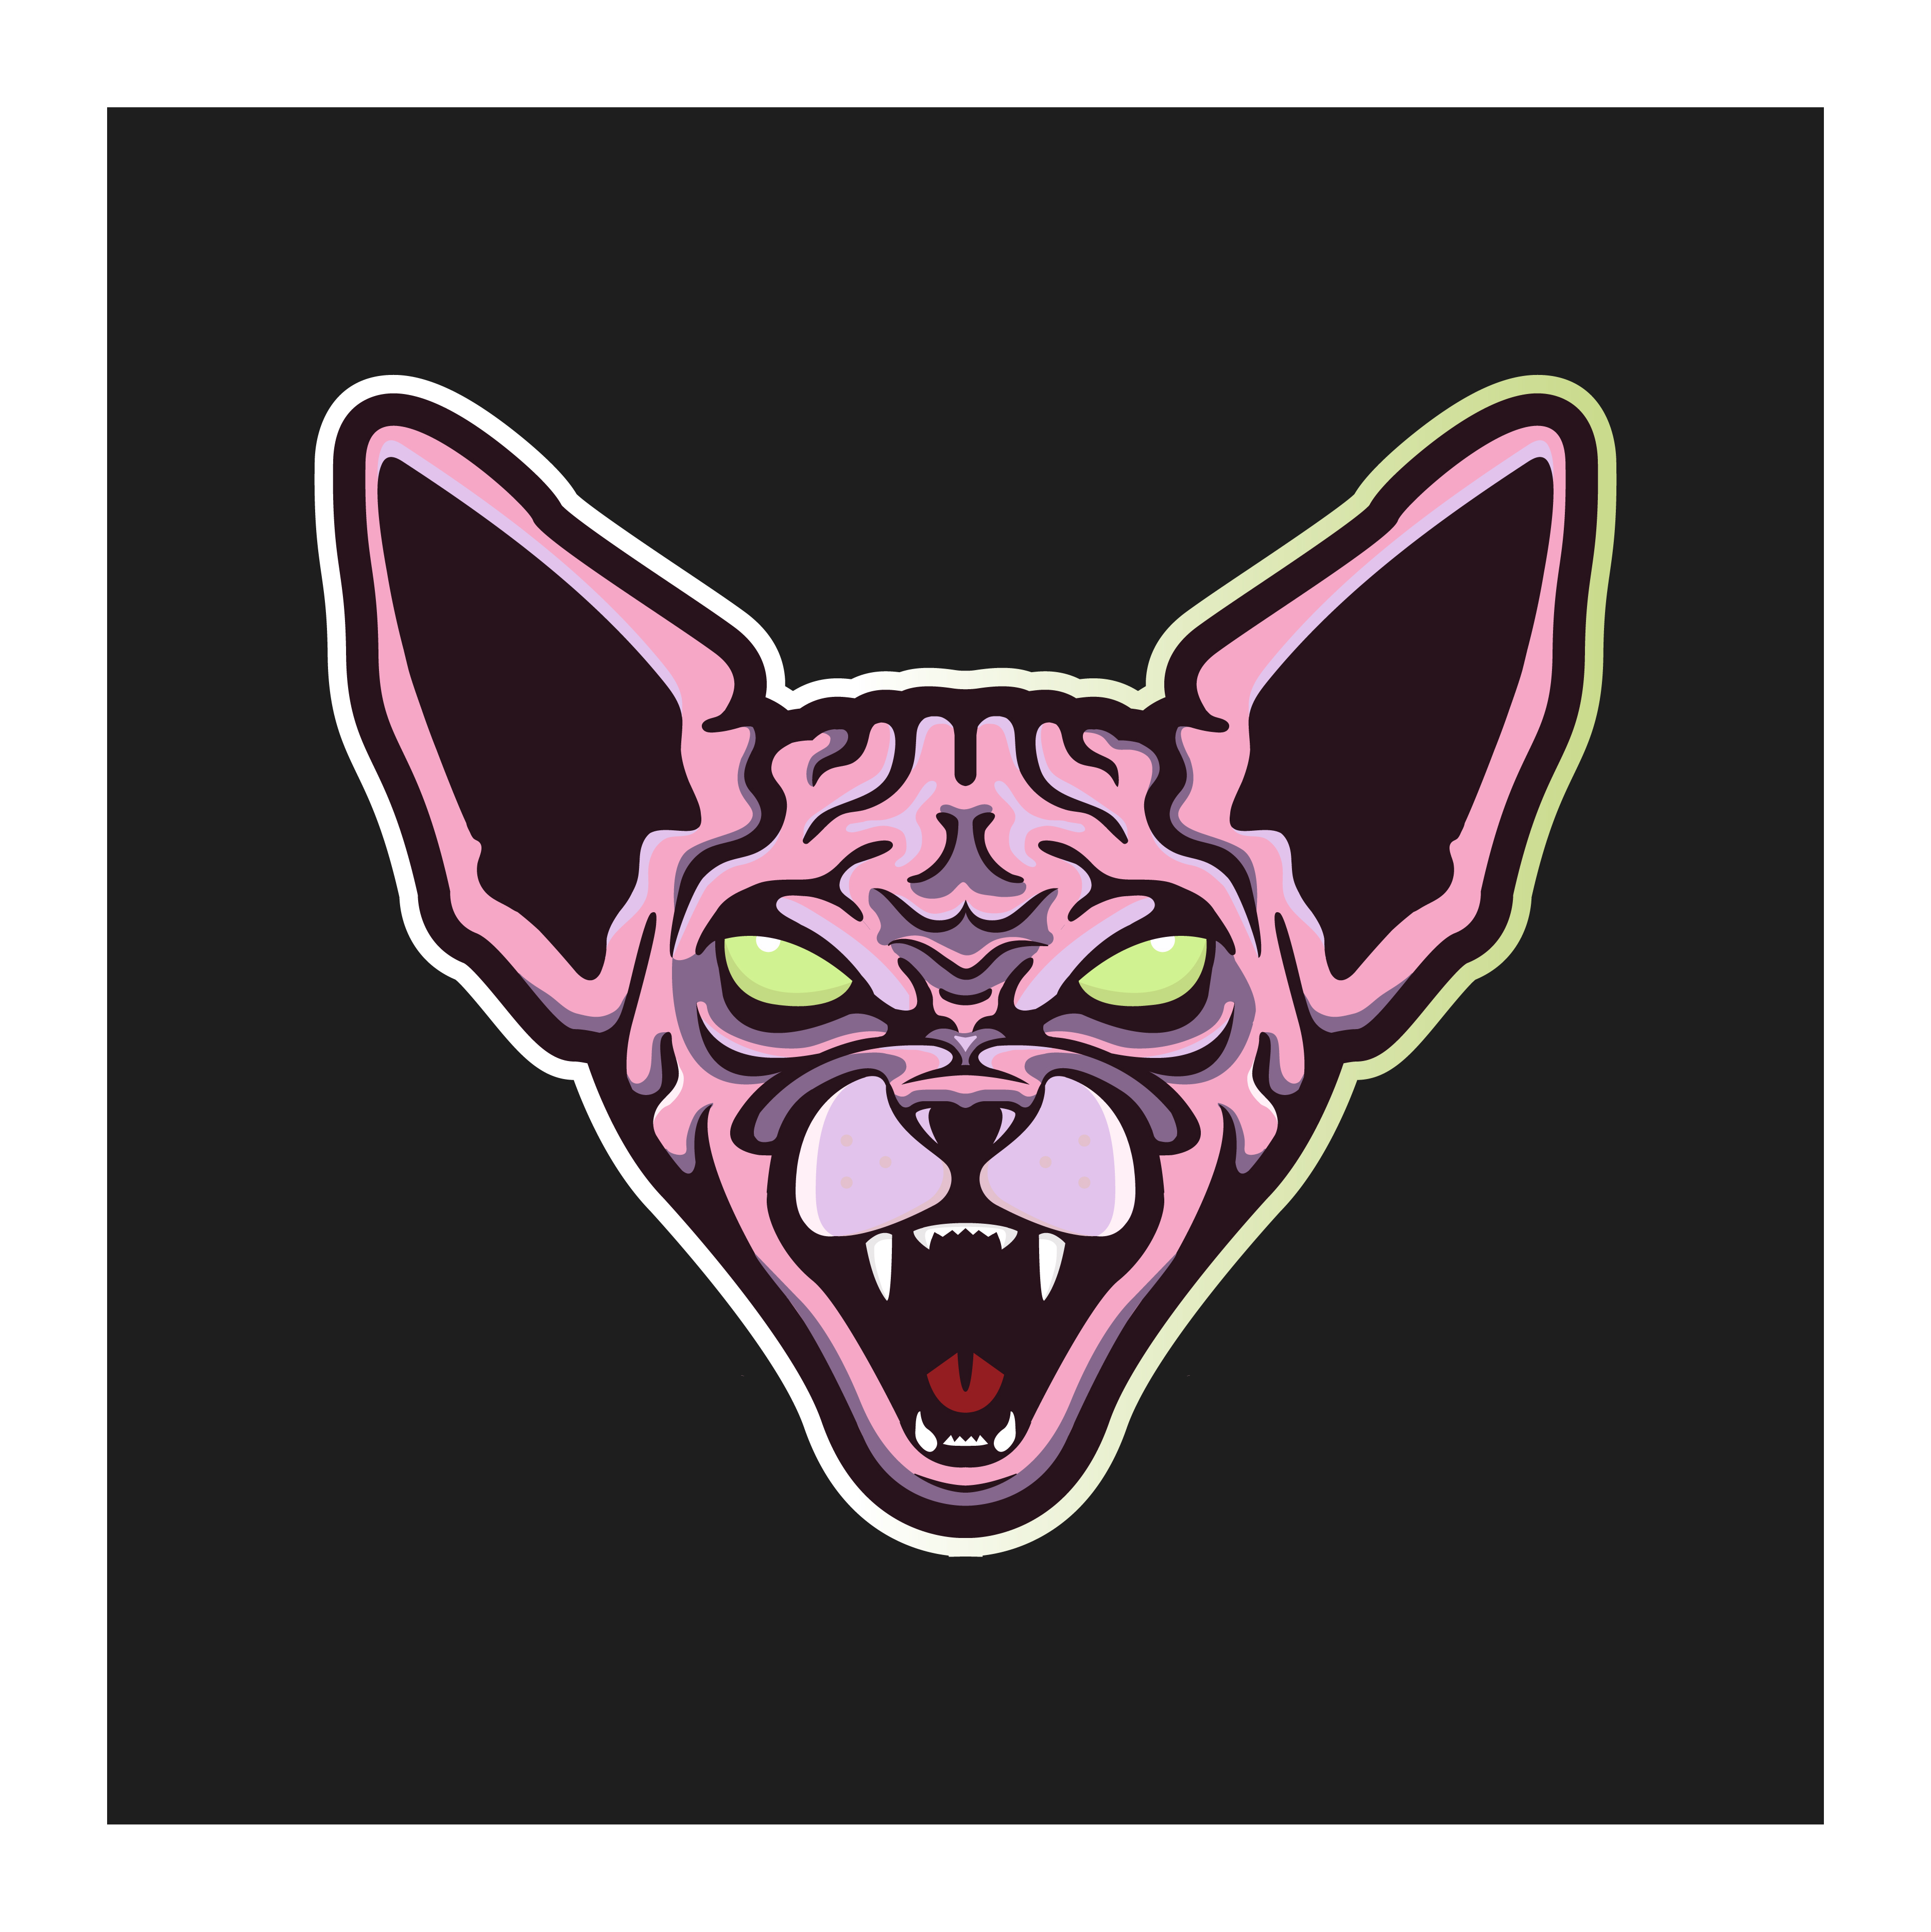 Sphynx Mascot Logo logo design by logo designer Kyle Goens Design for your inspiration and for the worlds largest logo competition